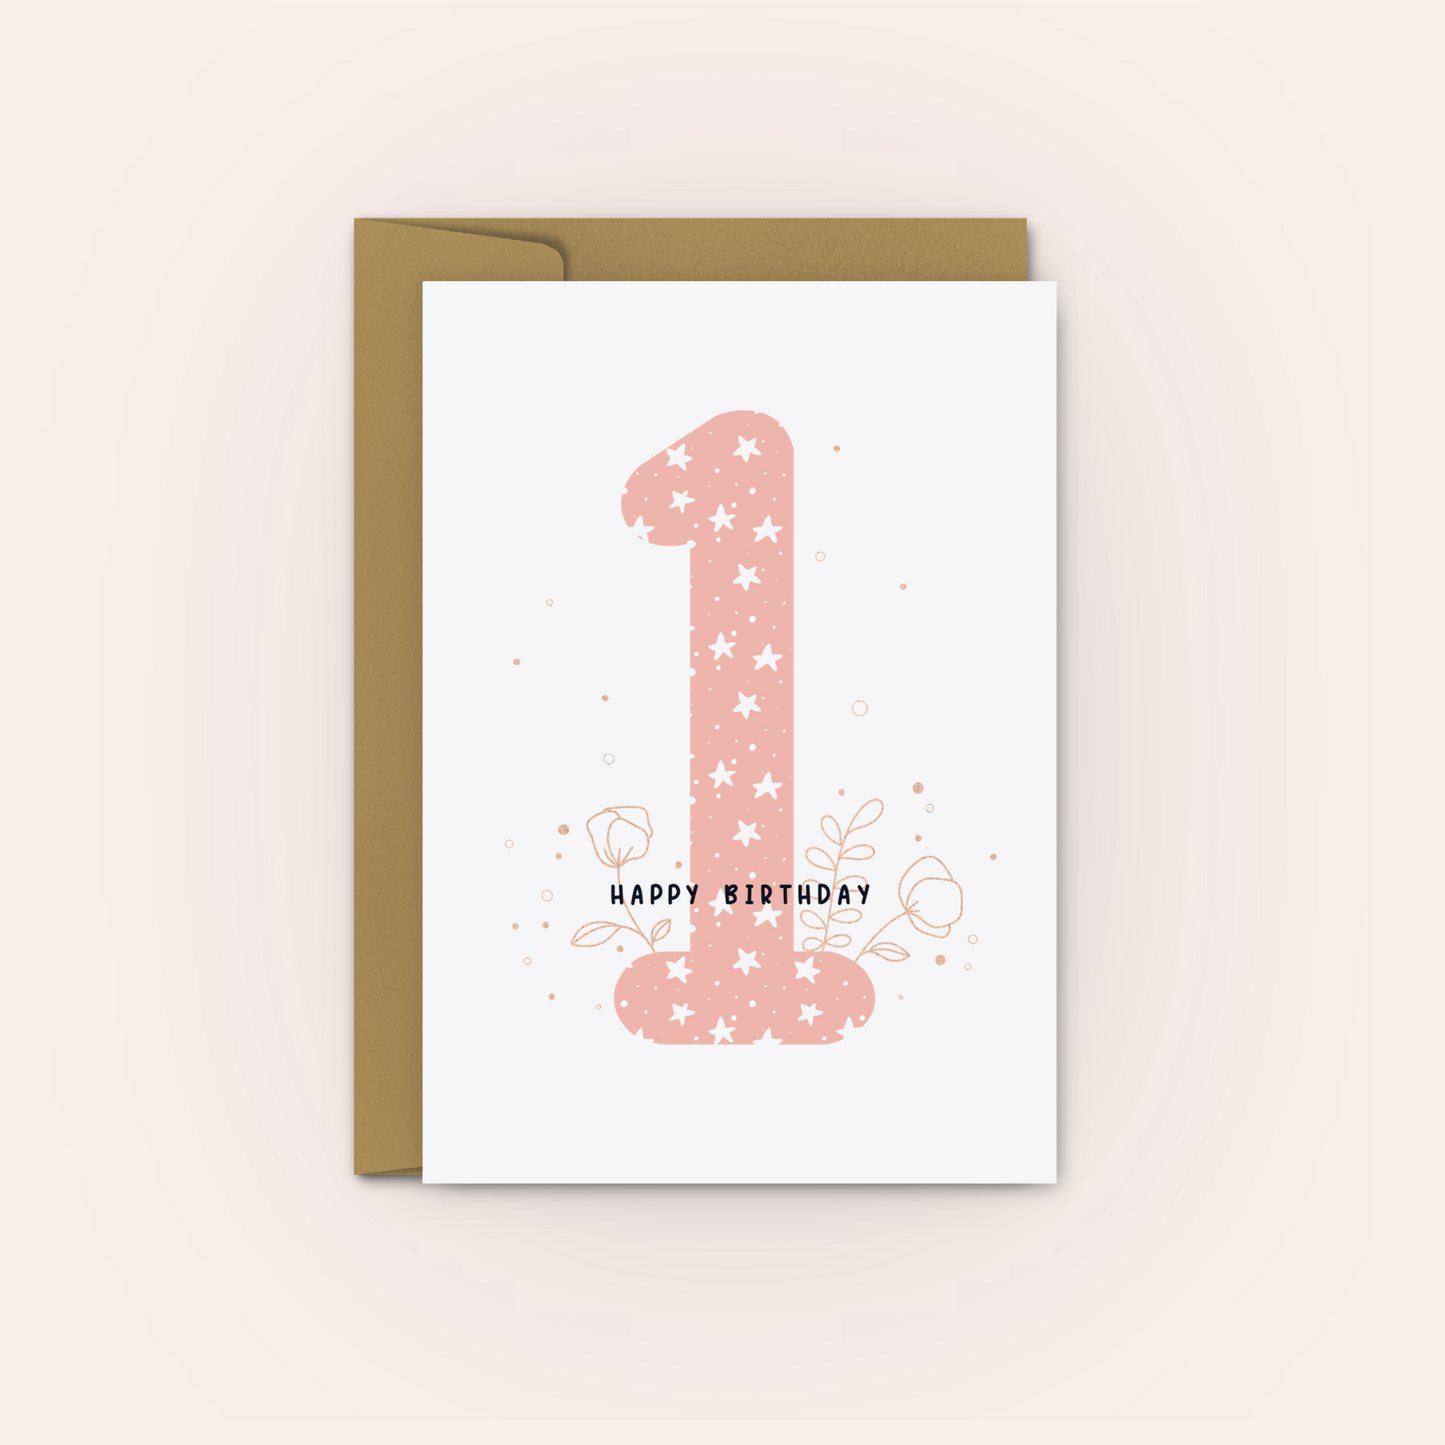 1st Birthday Card - Personalised Pink Hearts Birthday Card